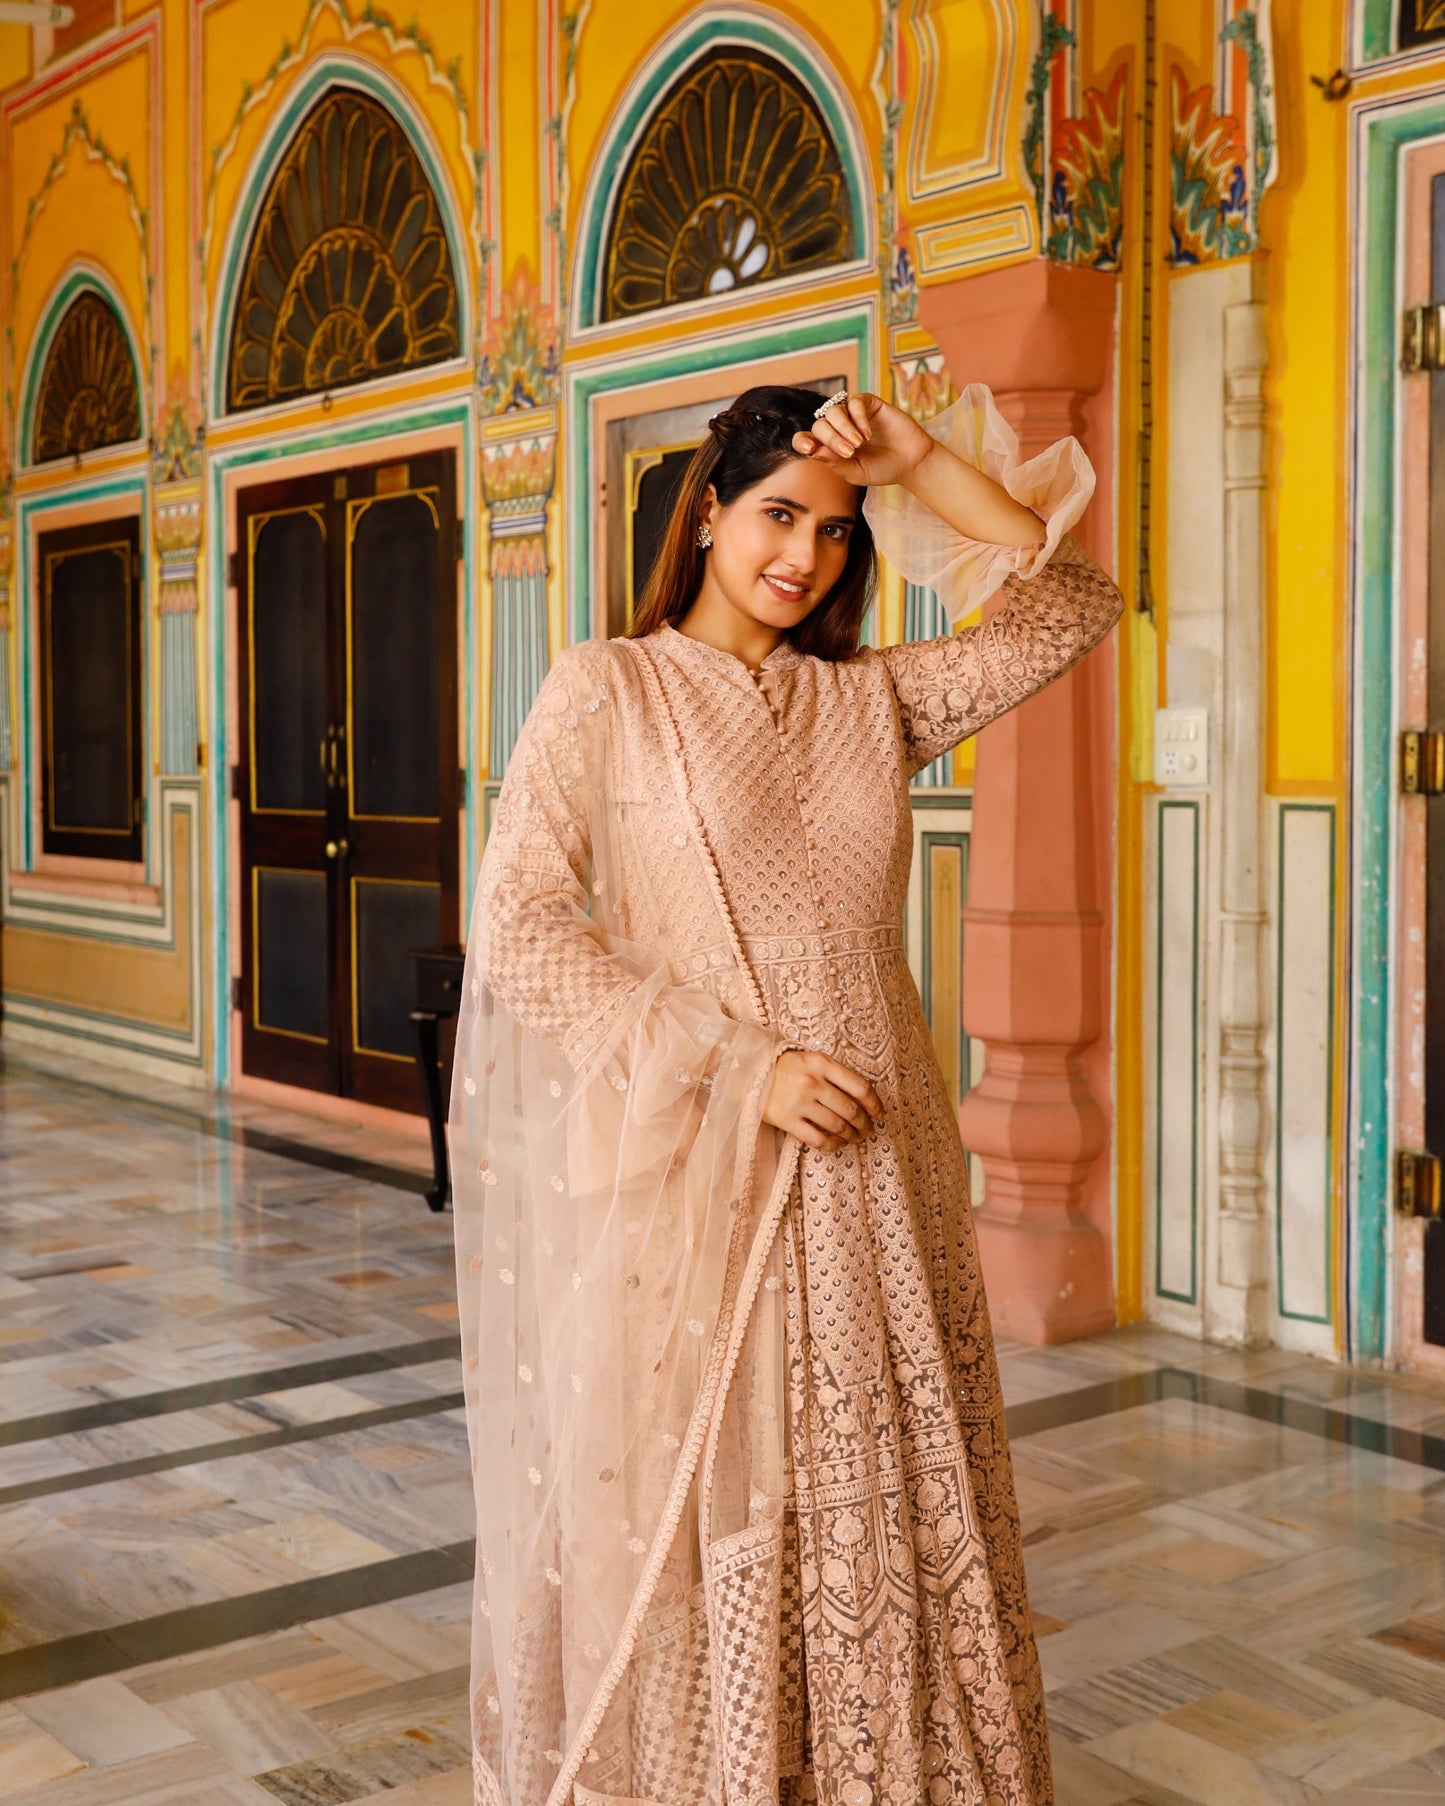 Women's Embroided Beige Full-Length Gown with Dupatta